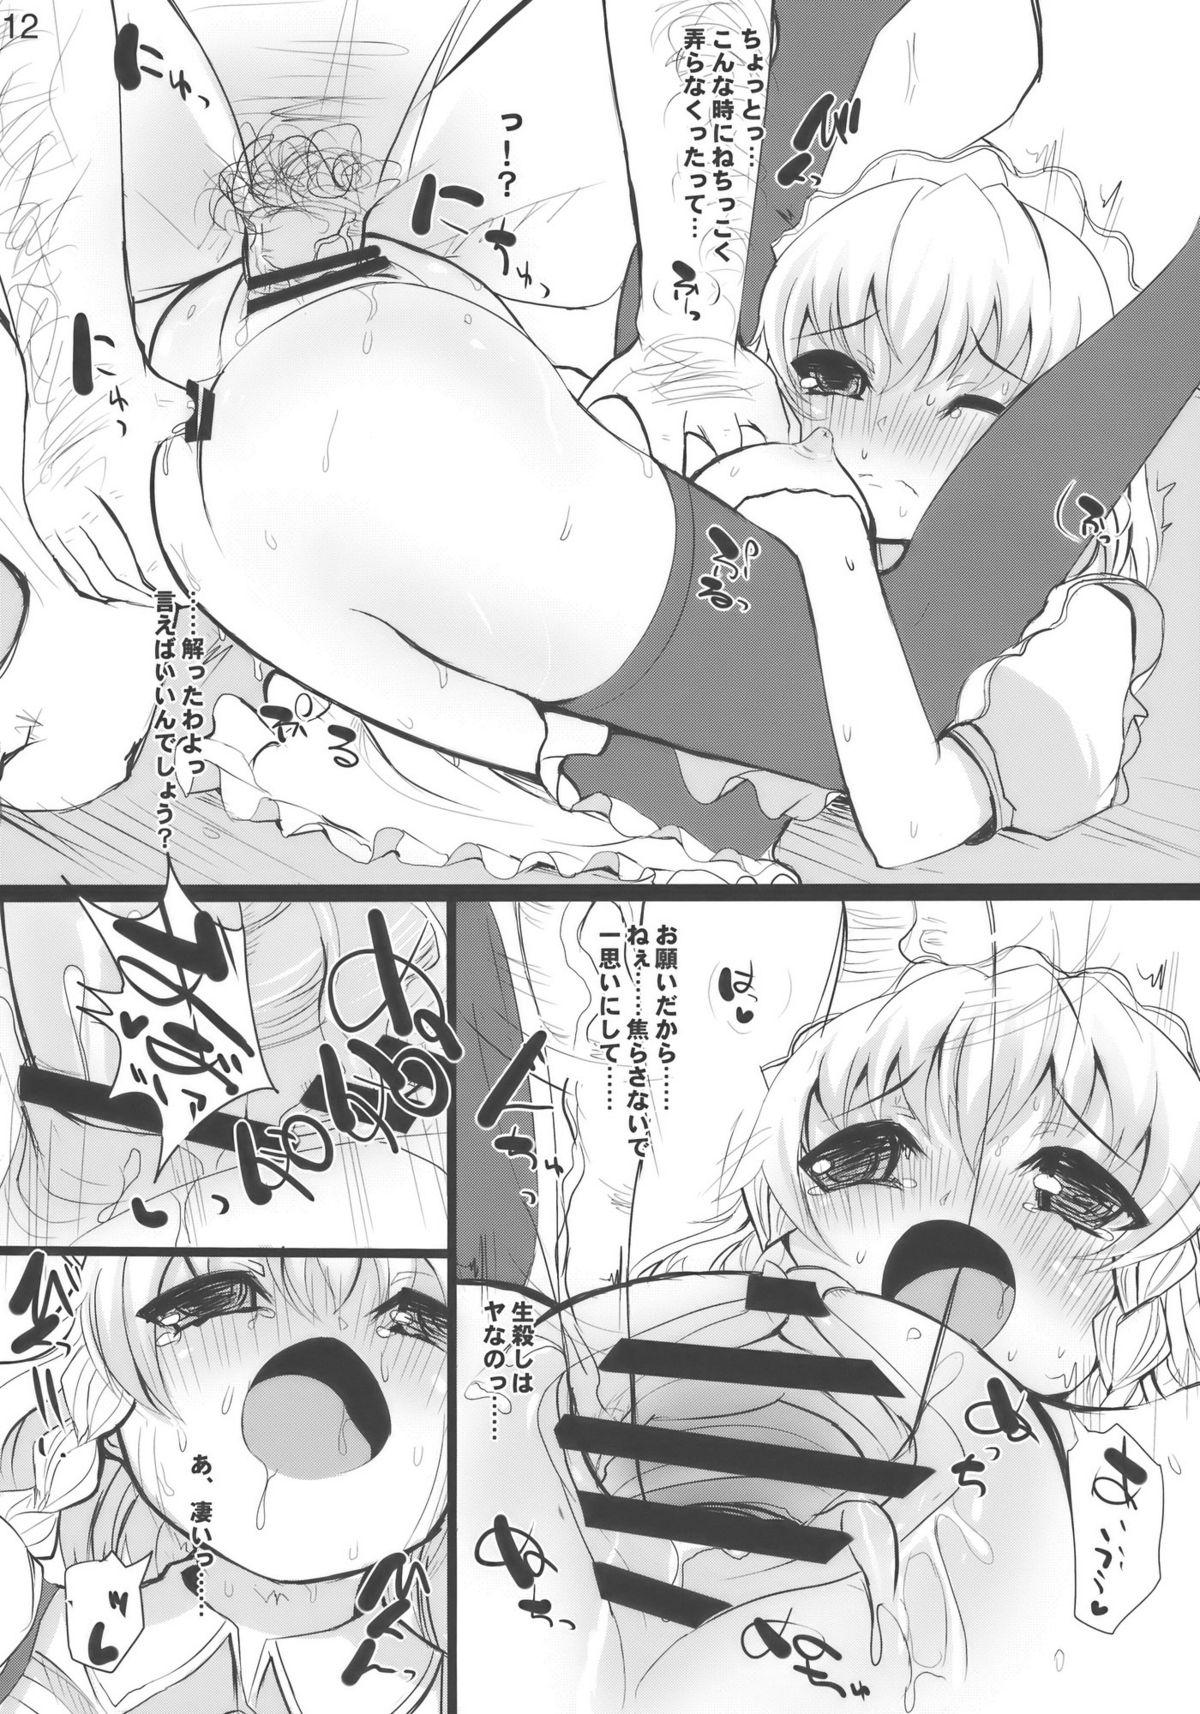  Feed me with your Kiss - Touhou project Bigboobs - Page 12